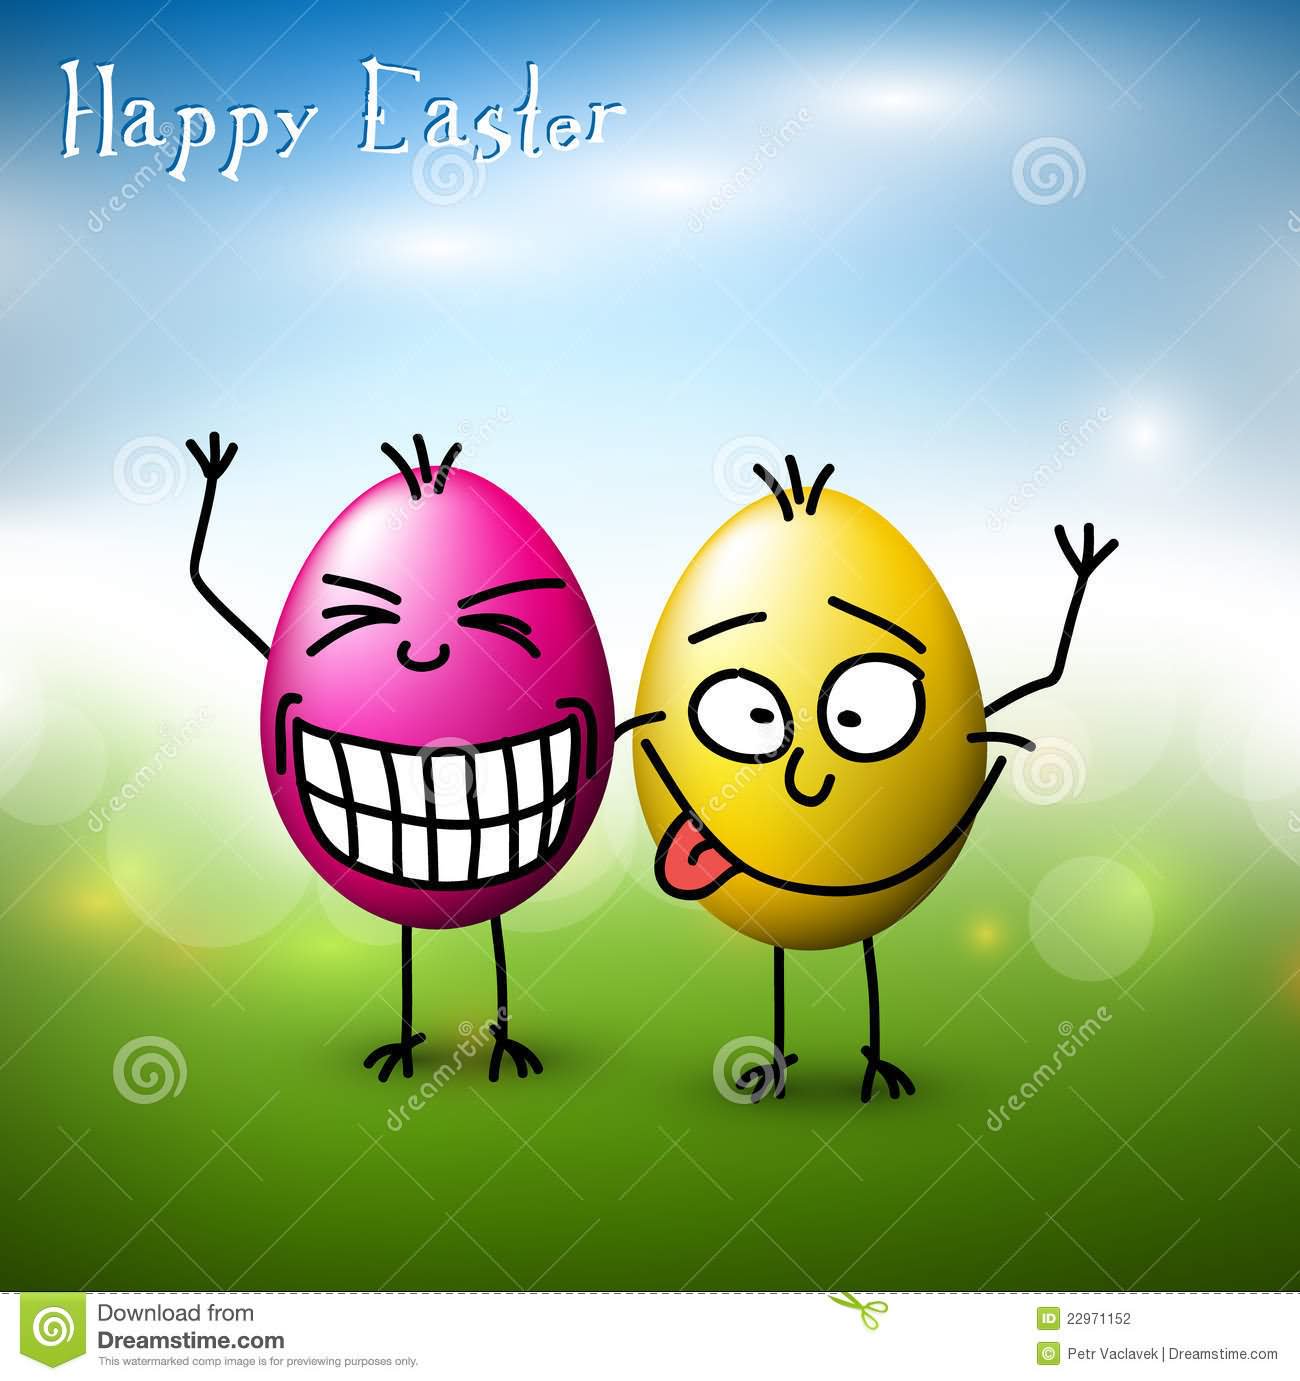 Happy Easter Smiley Eggs Picture